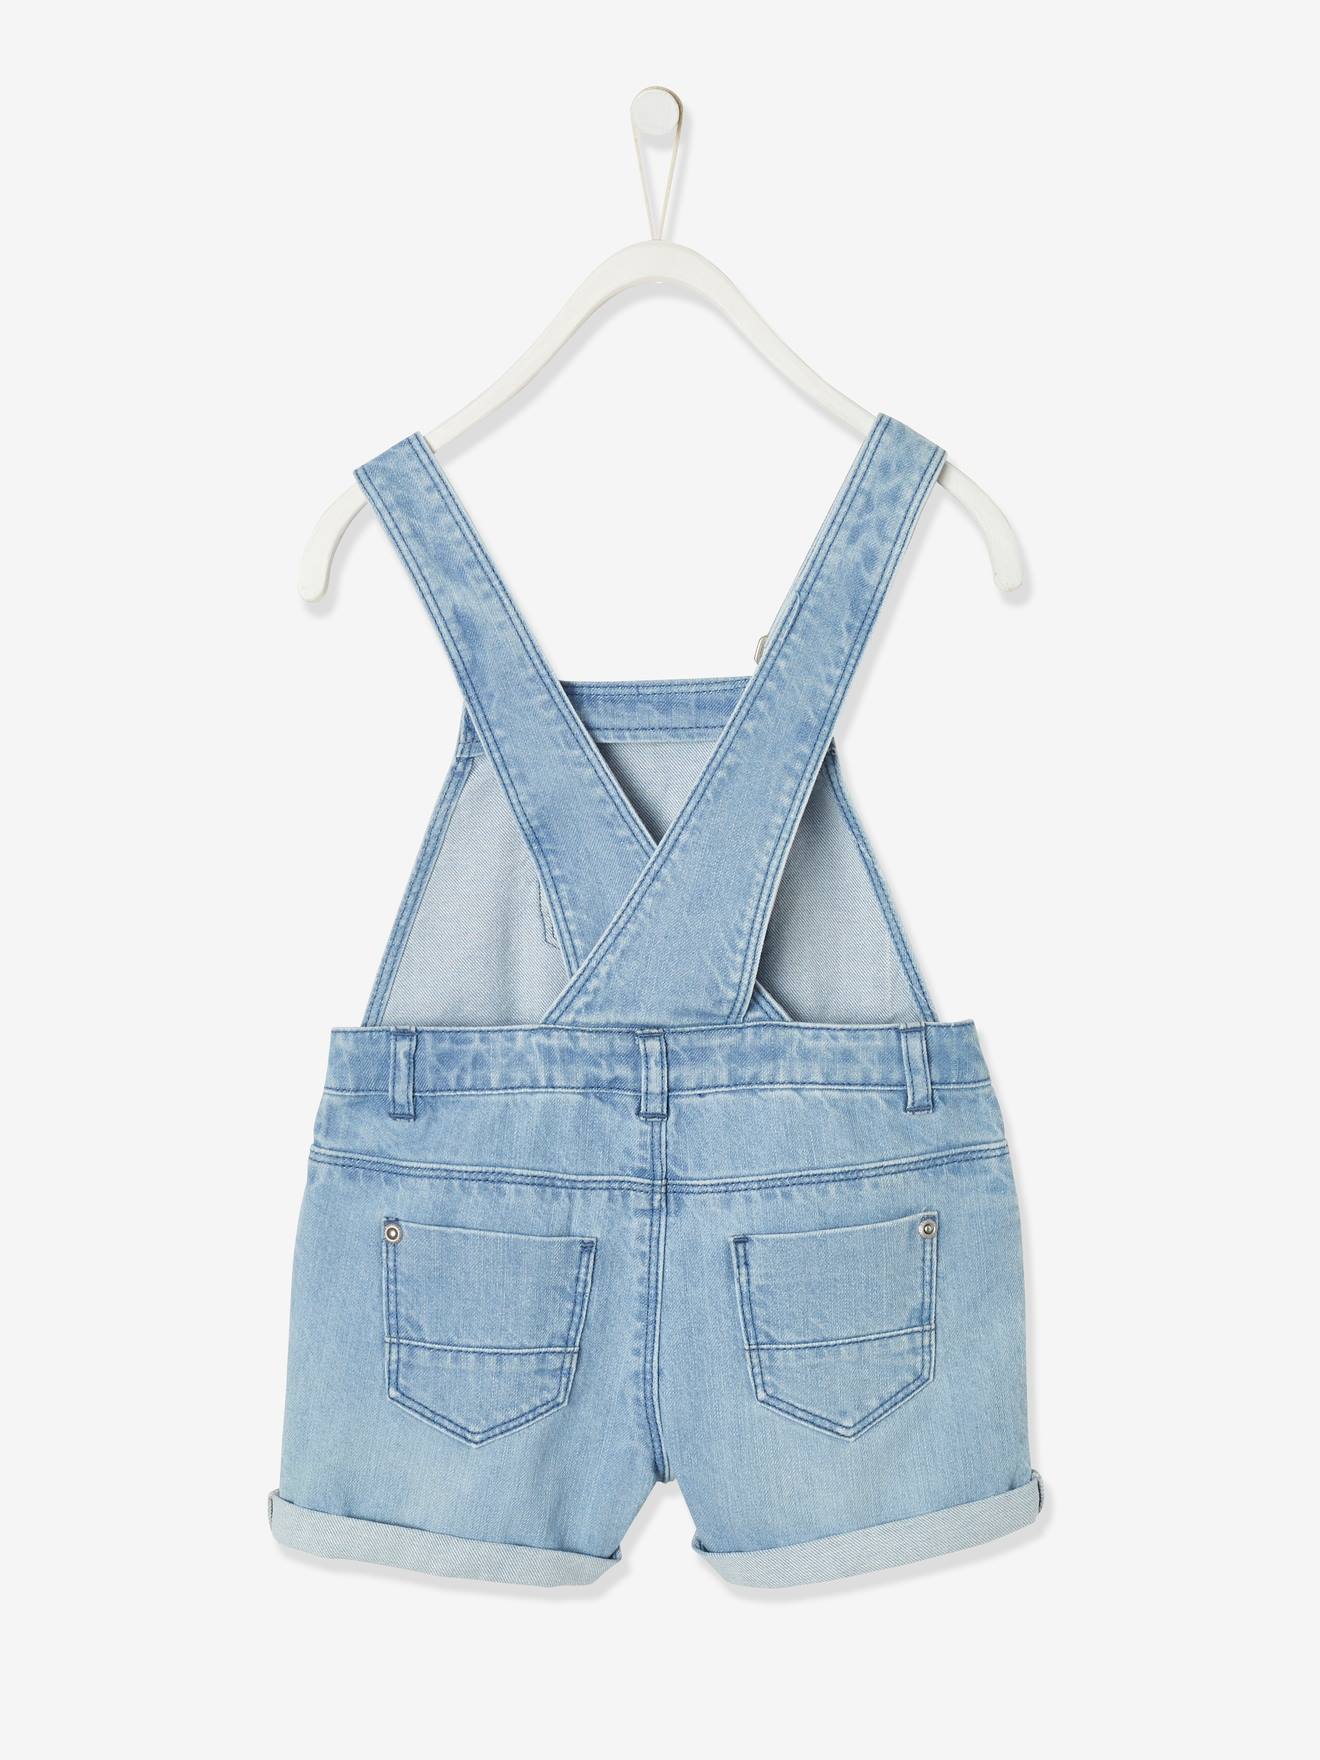 SS7 Girls Dungaree Shorts in Stretch Denim Blue 